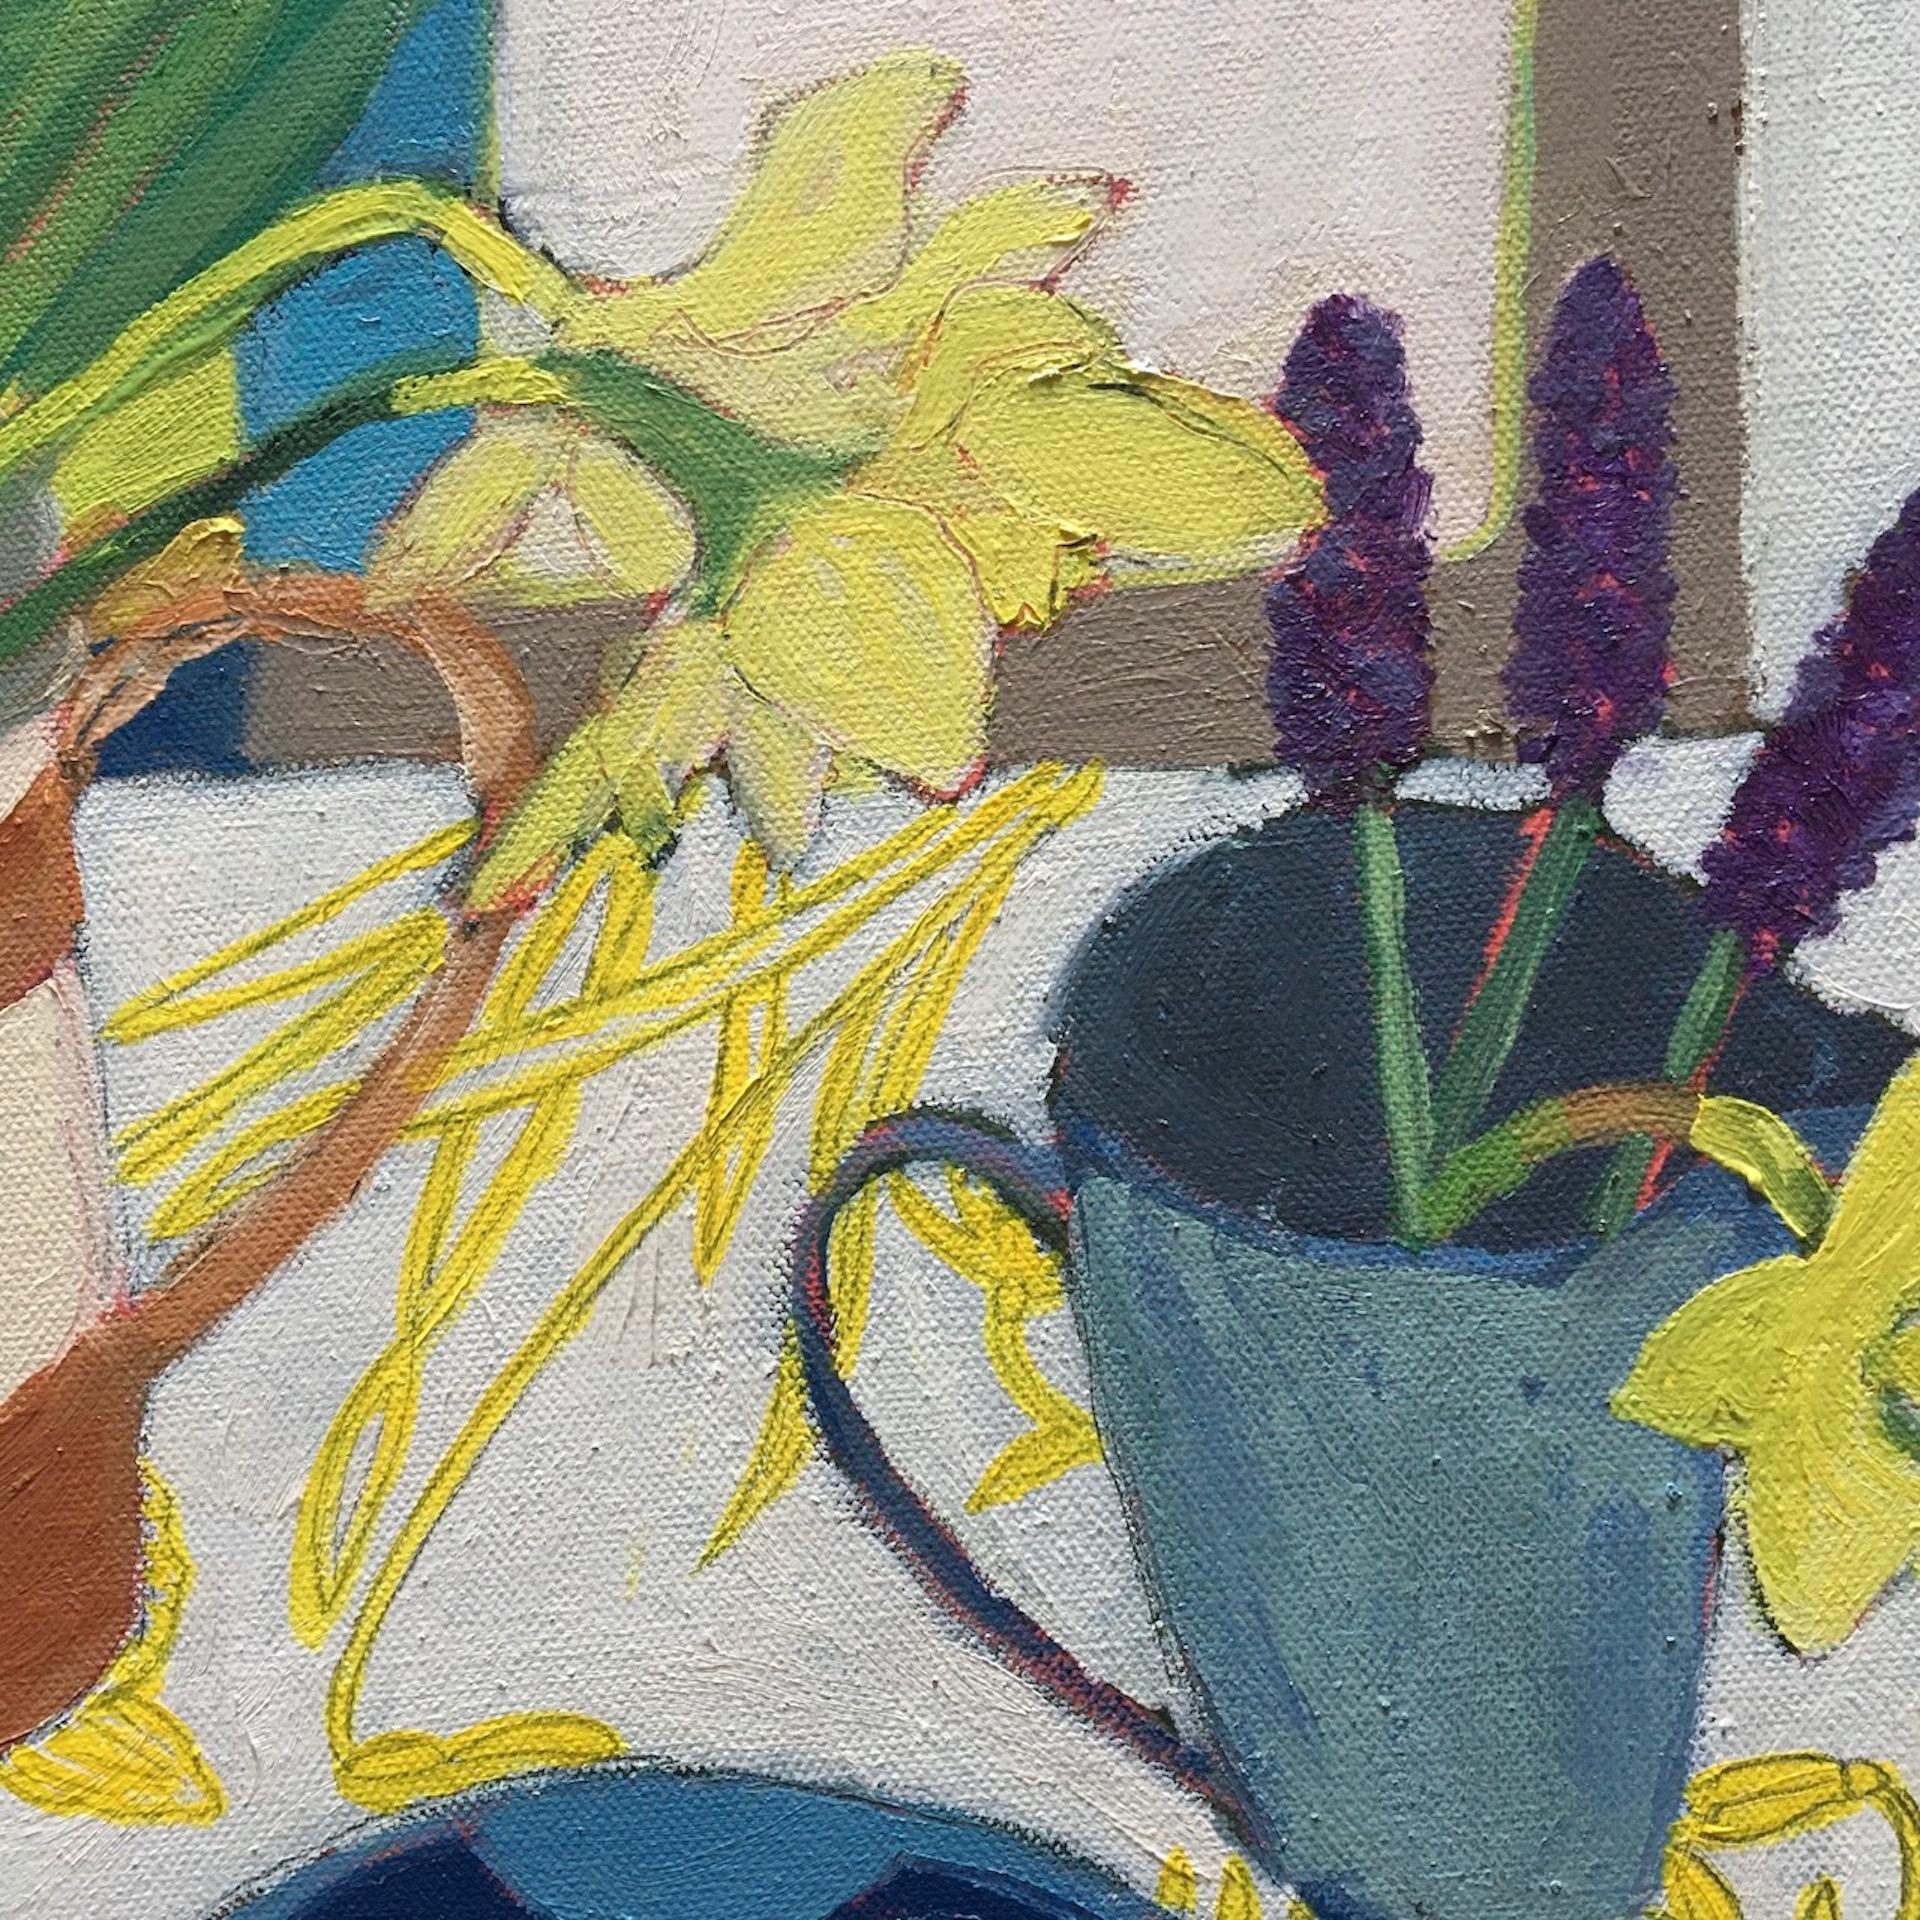 Daffodils and Grape Hyacinth [2020]
Original
Still Life
Oil Paint on Canvas
Size: H:40 cm x W:40 cm
Sold Unframed
Please note that insitu images are purely an indication of how a piece may look

Daffodils and Grape Hyacinth is an original painting